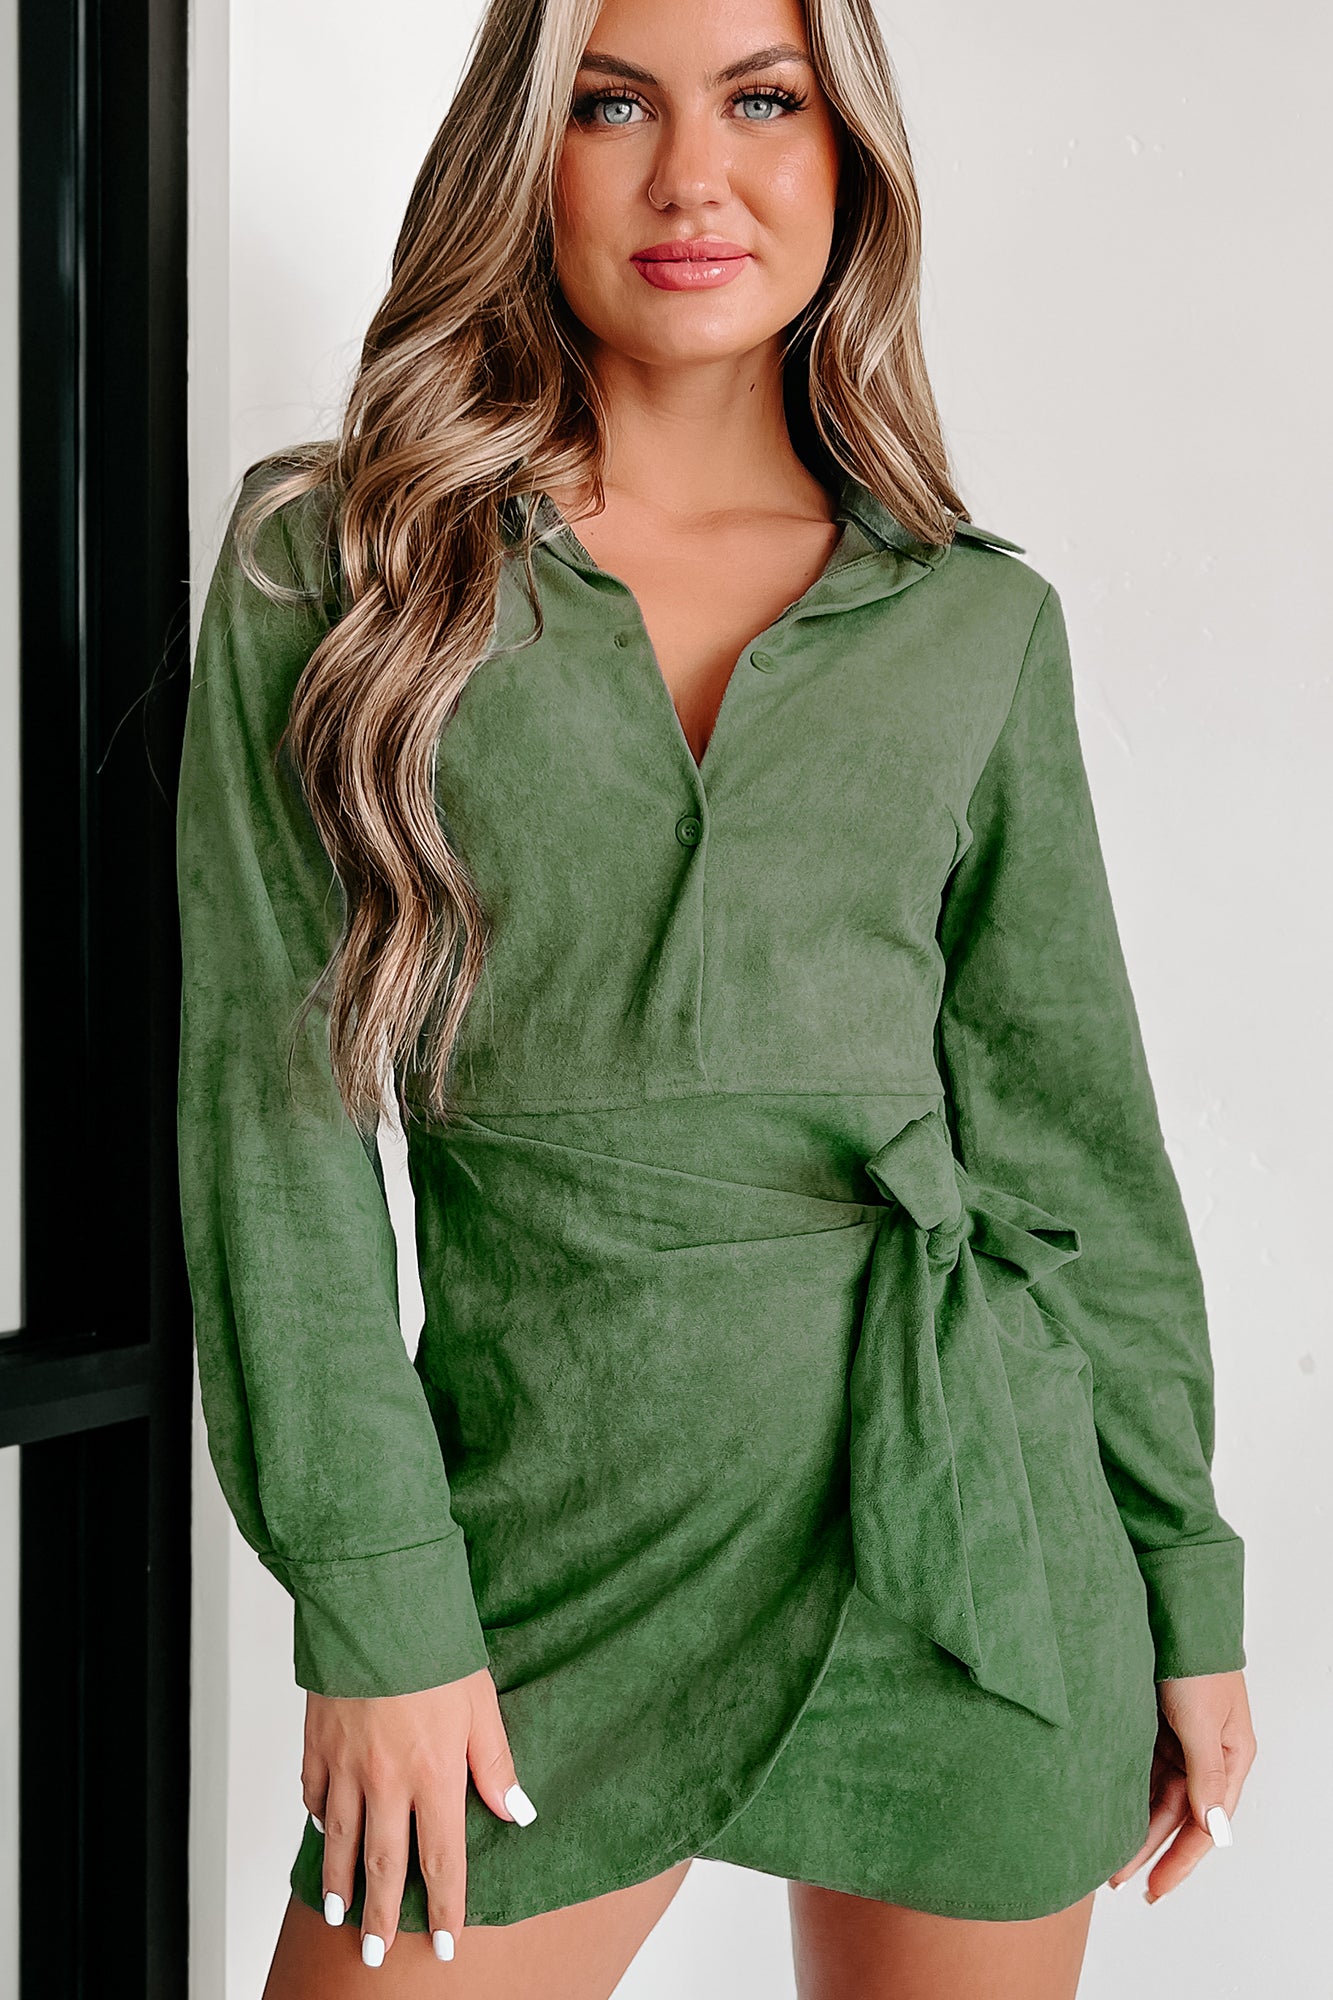 Forgot You Existed Faux Suede Wrap Dress (Green) - NanaMacs